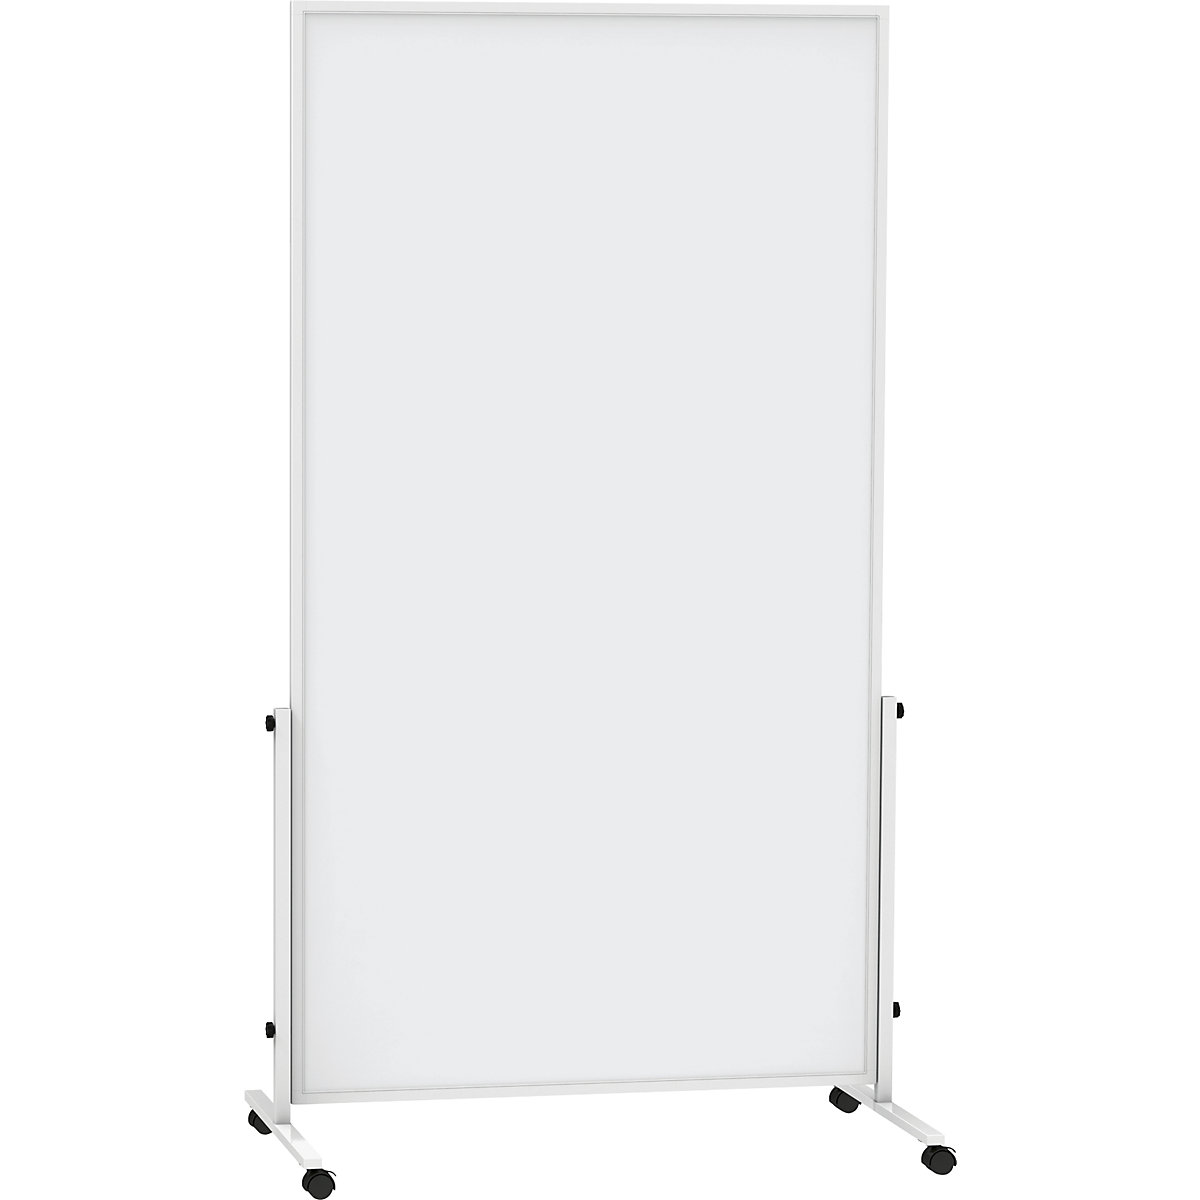 MAUL Whiteboard MAUL®solid easy2move, mobil, HxT 1965 x 640 mm, weiß, Tafel-HxB 1800 x 1000 mm